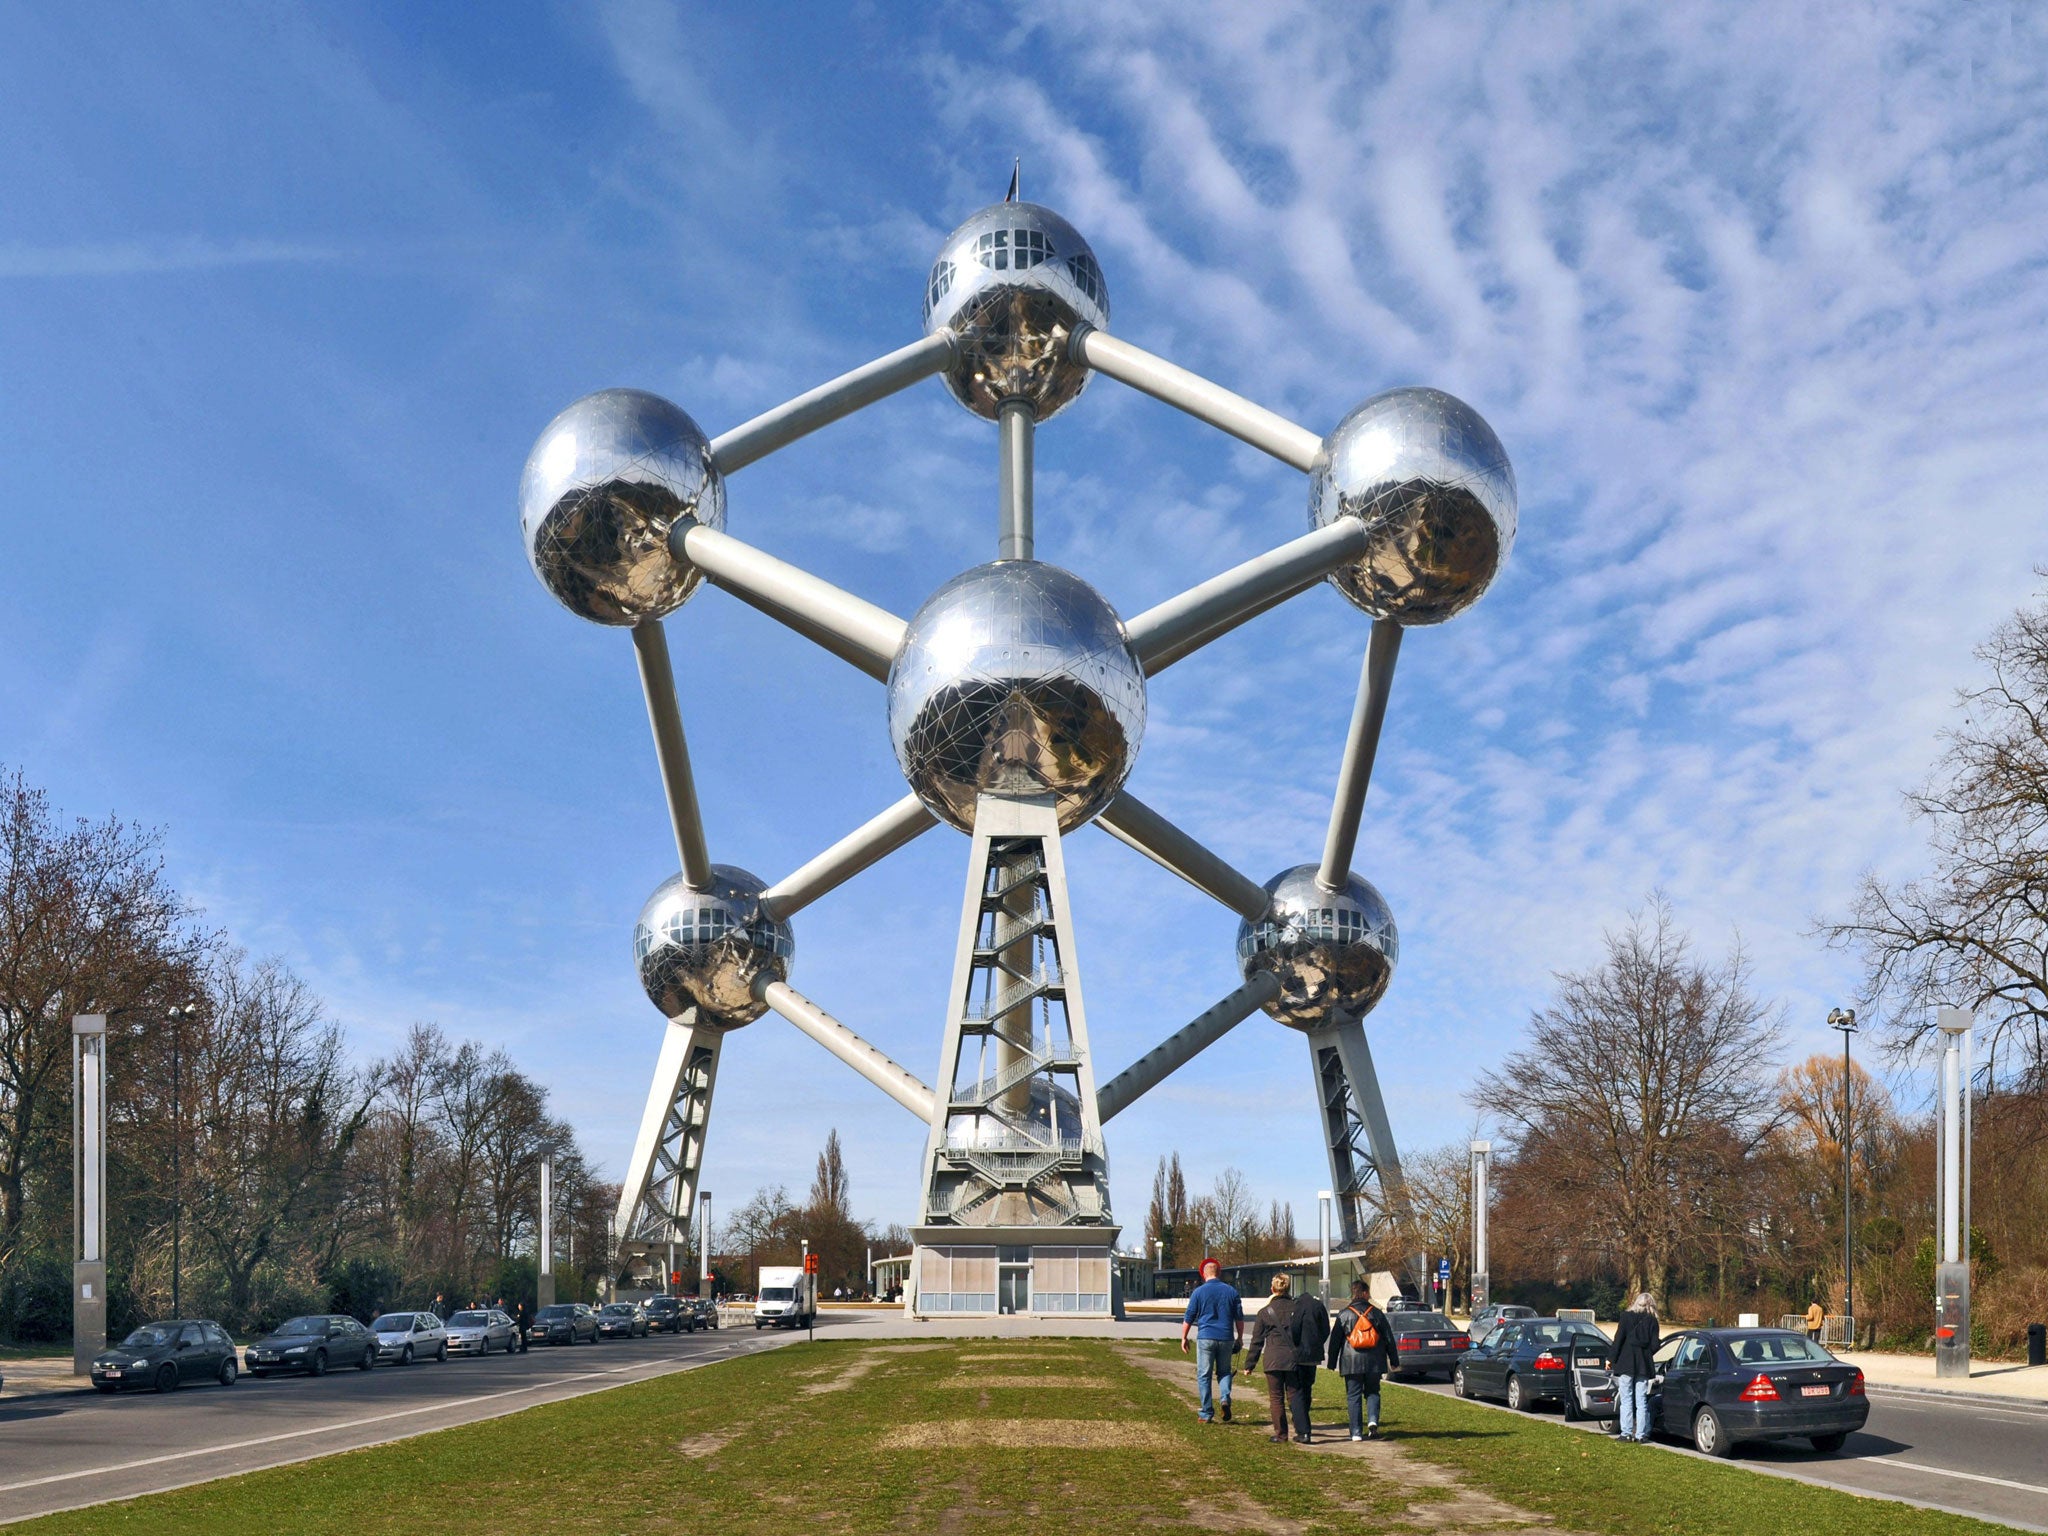 A Syrian rebel support group has threatened to blow up the Atomium in Brussels